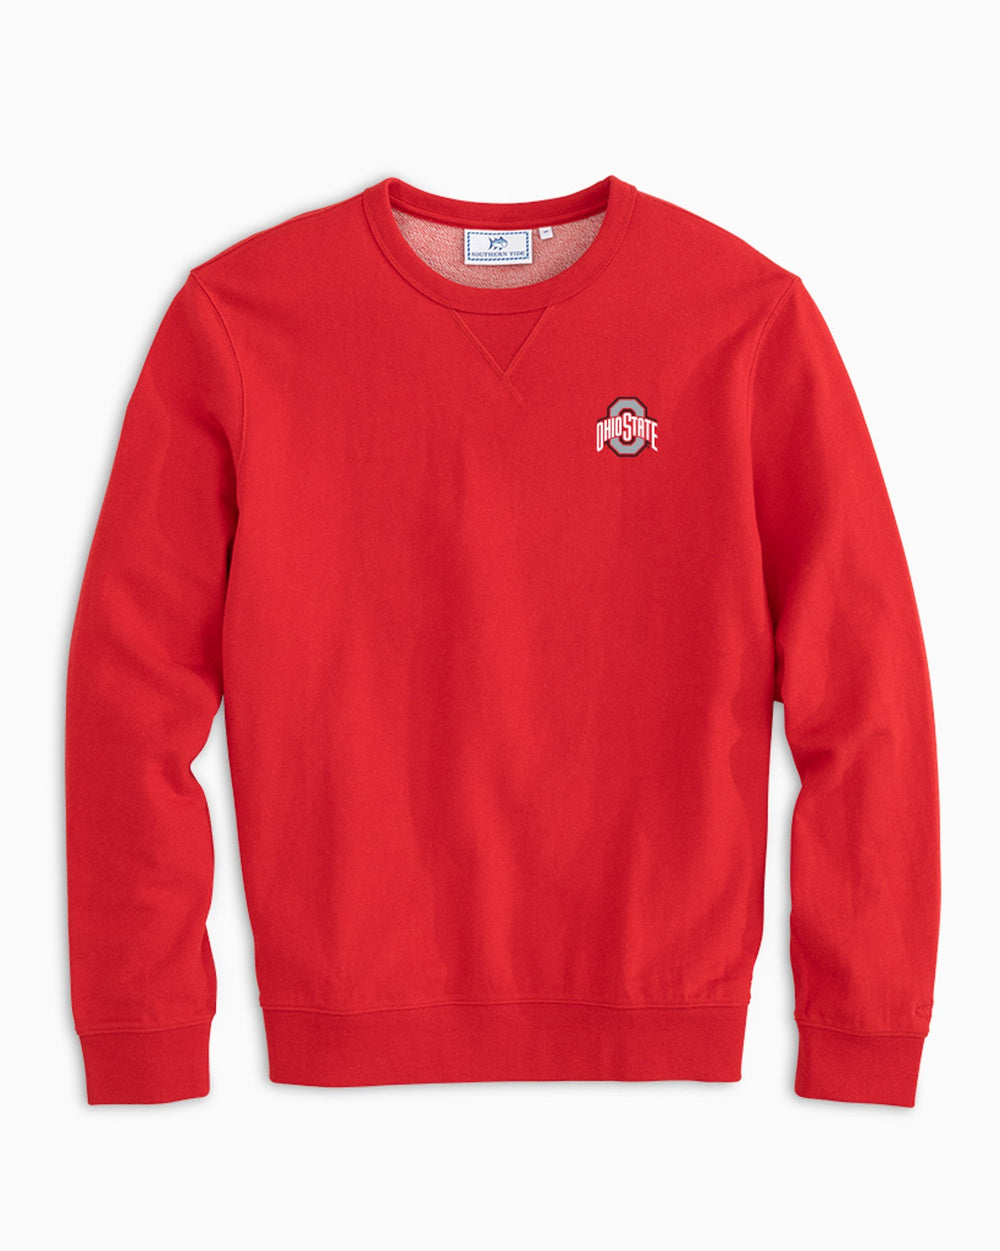 The front of the Men's Ohio State Buckeyes Upper Deck Pullover Sweatshirt by Southern Tide - Heather Varsity Red